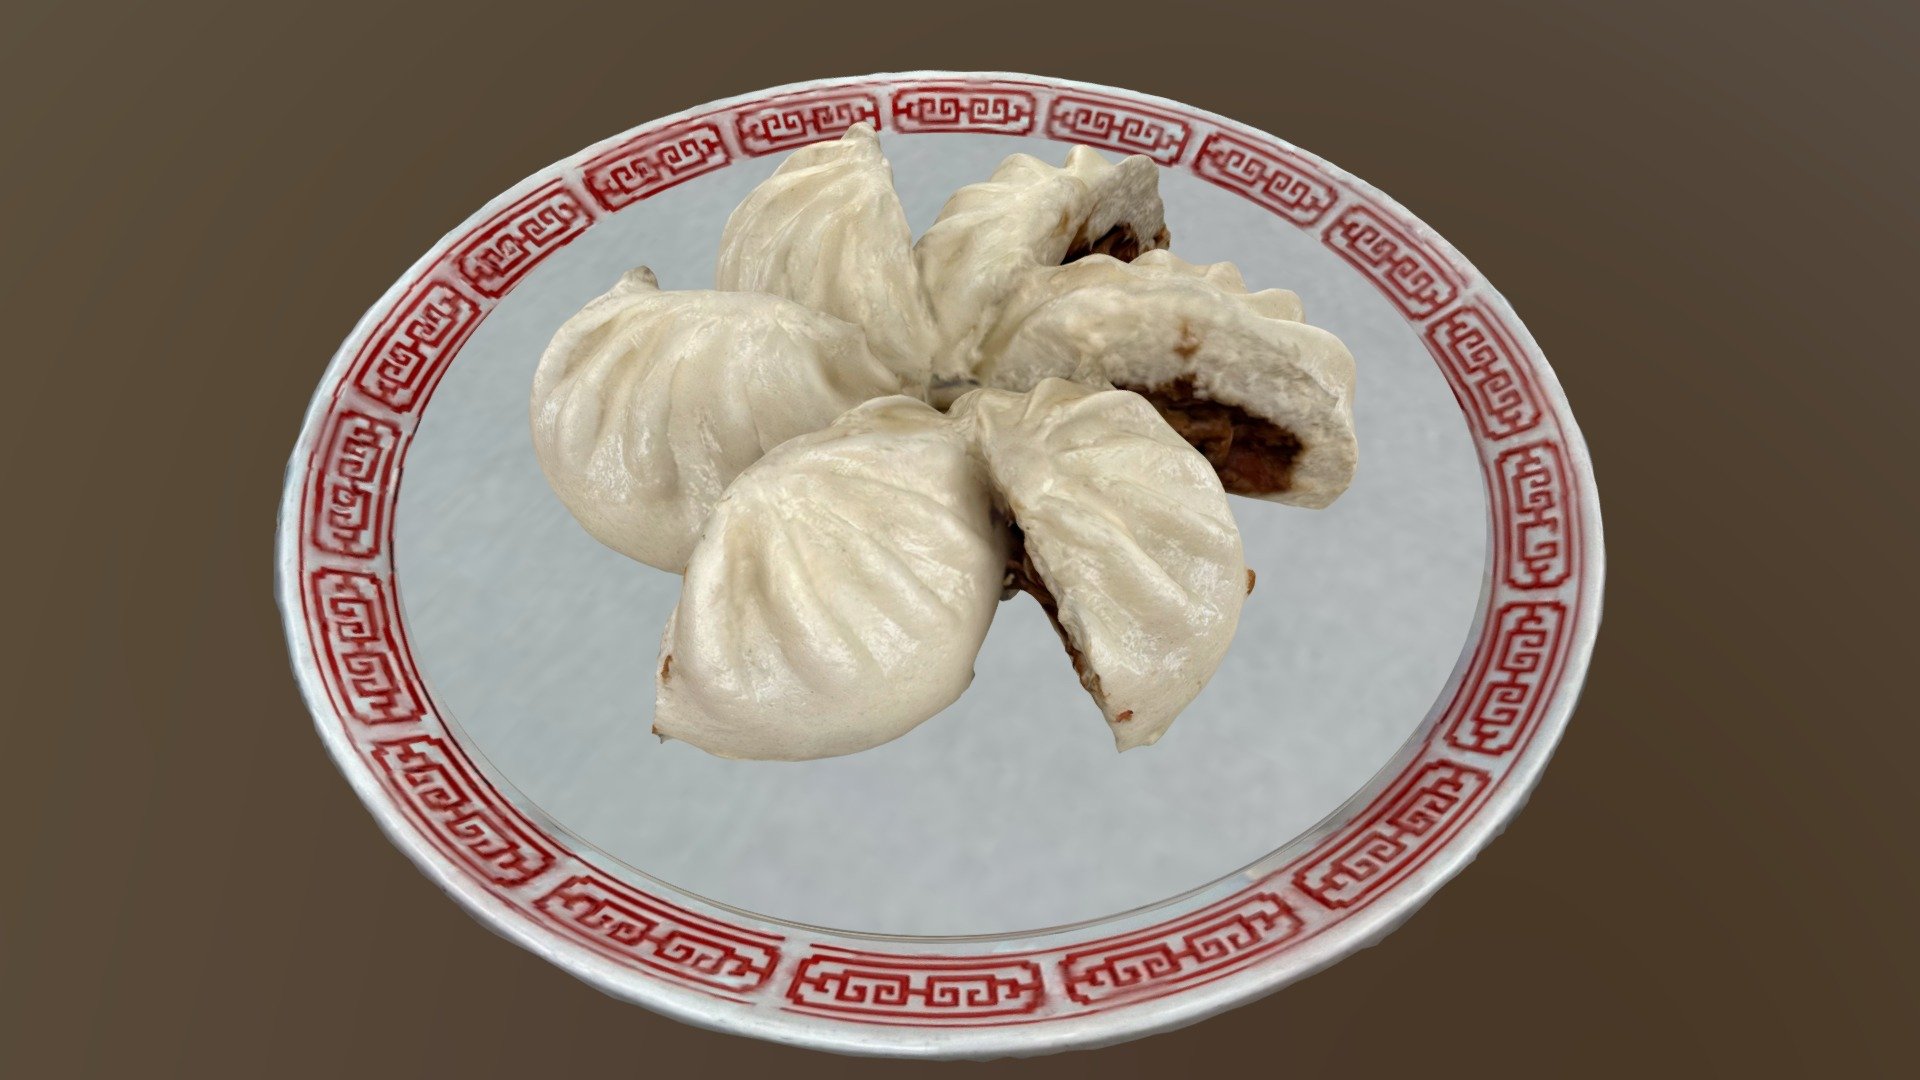 Fluffy, steamed buns filled with sweet and savory barbecued pork

Emma’s
Boldly Redefined Asian Cuisine Driven by modern culinary technique and Northern California influence

817 Francisco Blvd W, San Rafael, CA 94901 - Emma's BBQ Pork Buns - 3D model by Augmented Reality Marketing Solutions LLC (@AugRealMarketing) 3d model